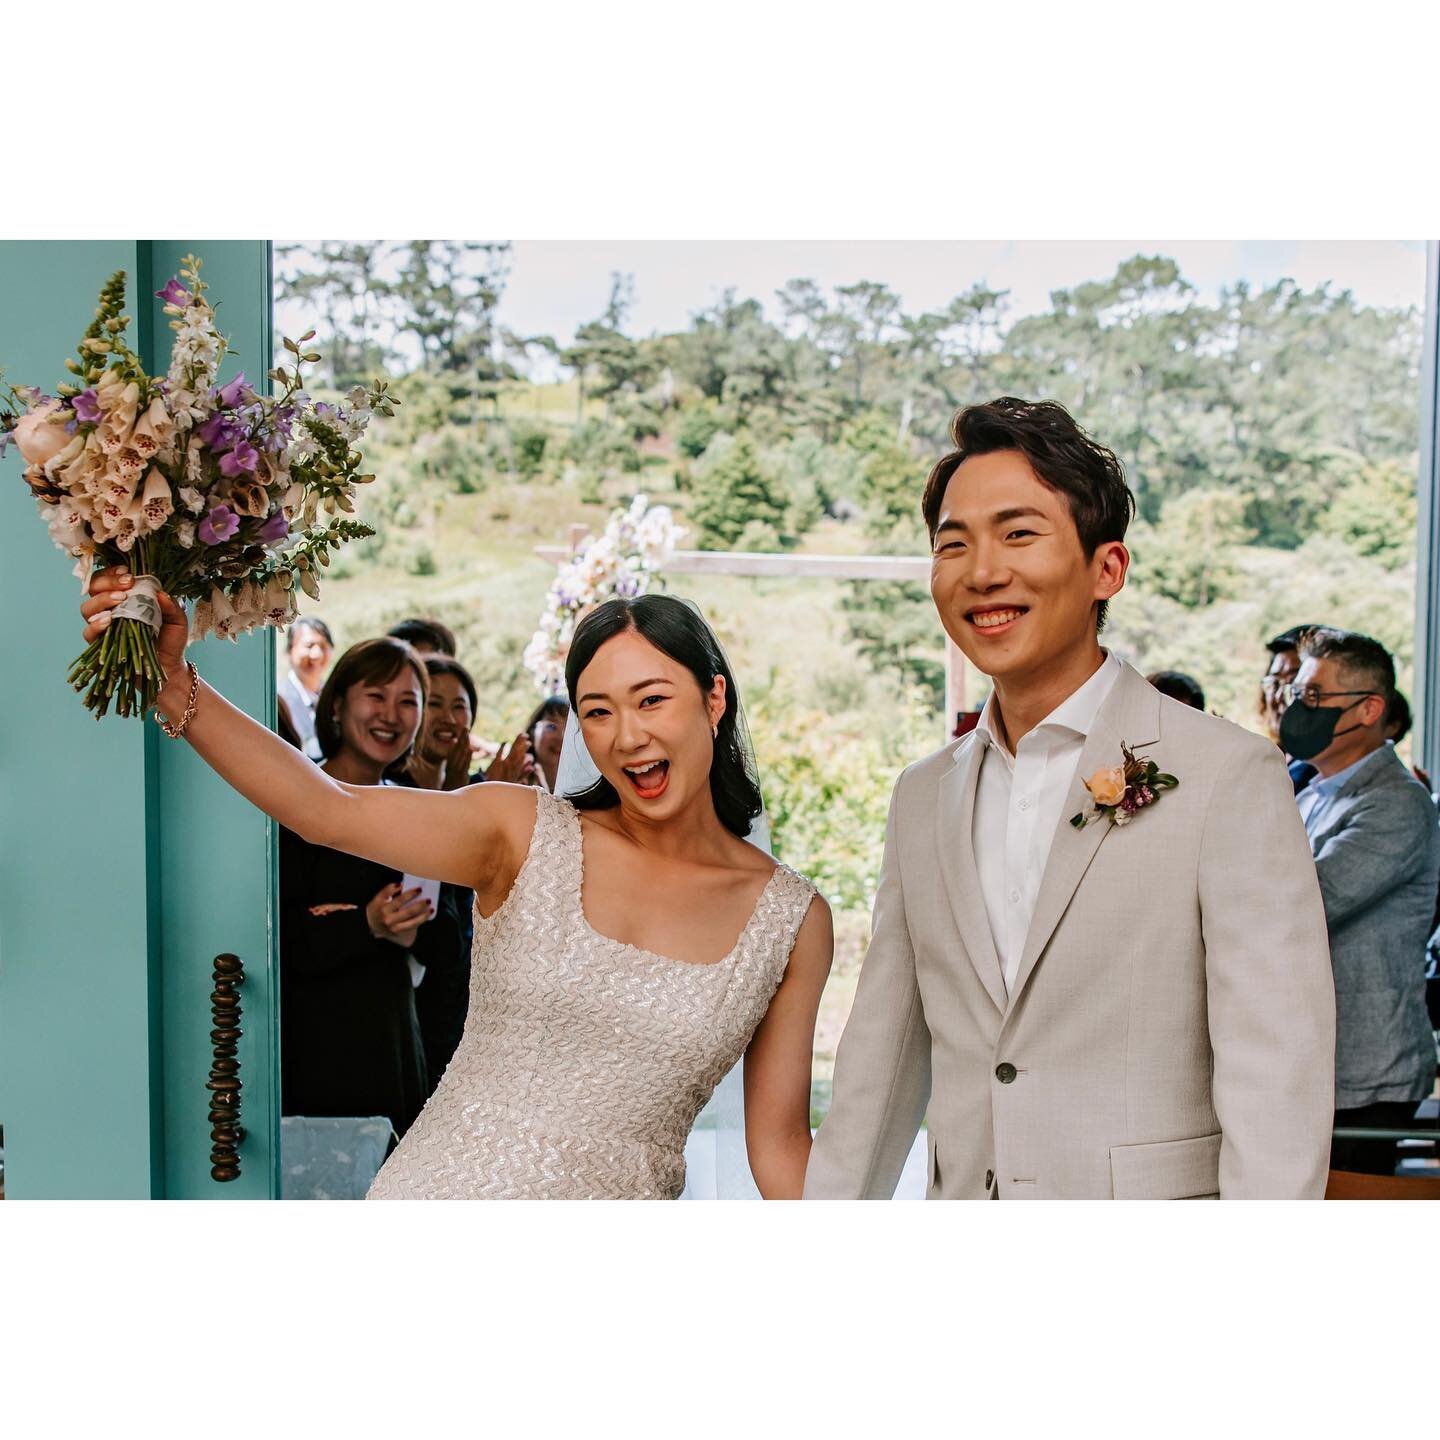 Congratulations and #happyanniversary Chaehee and Jinsu #19112022
💚
A year ago today I was honoured to host this stunning couples special bespoke wedding at @littlewildernessnz 
We had stunning florals from @whererosemarygrows and incredible photogr